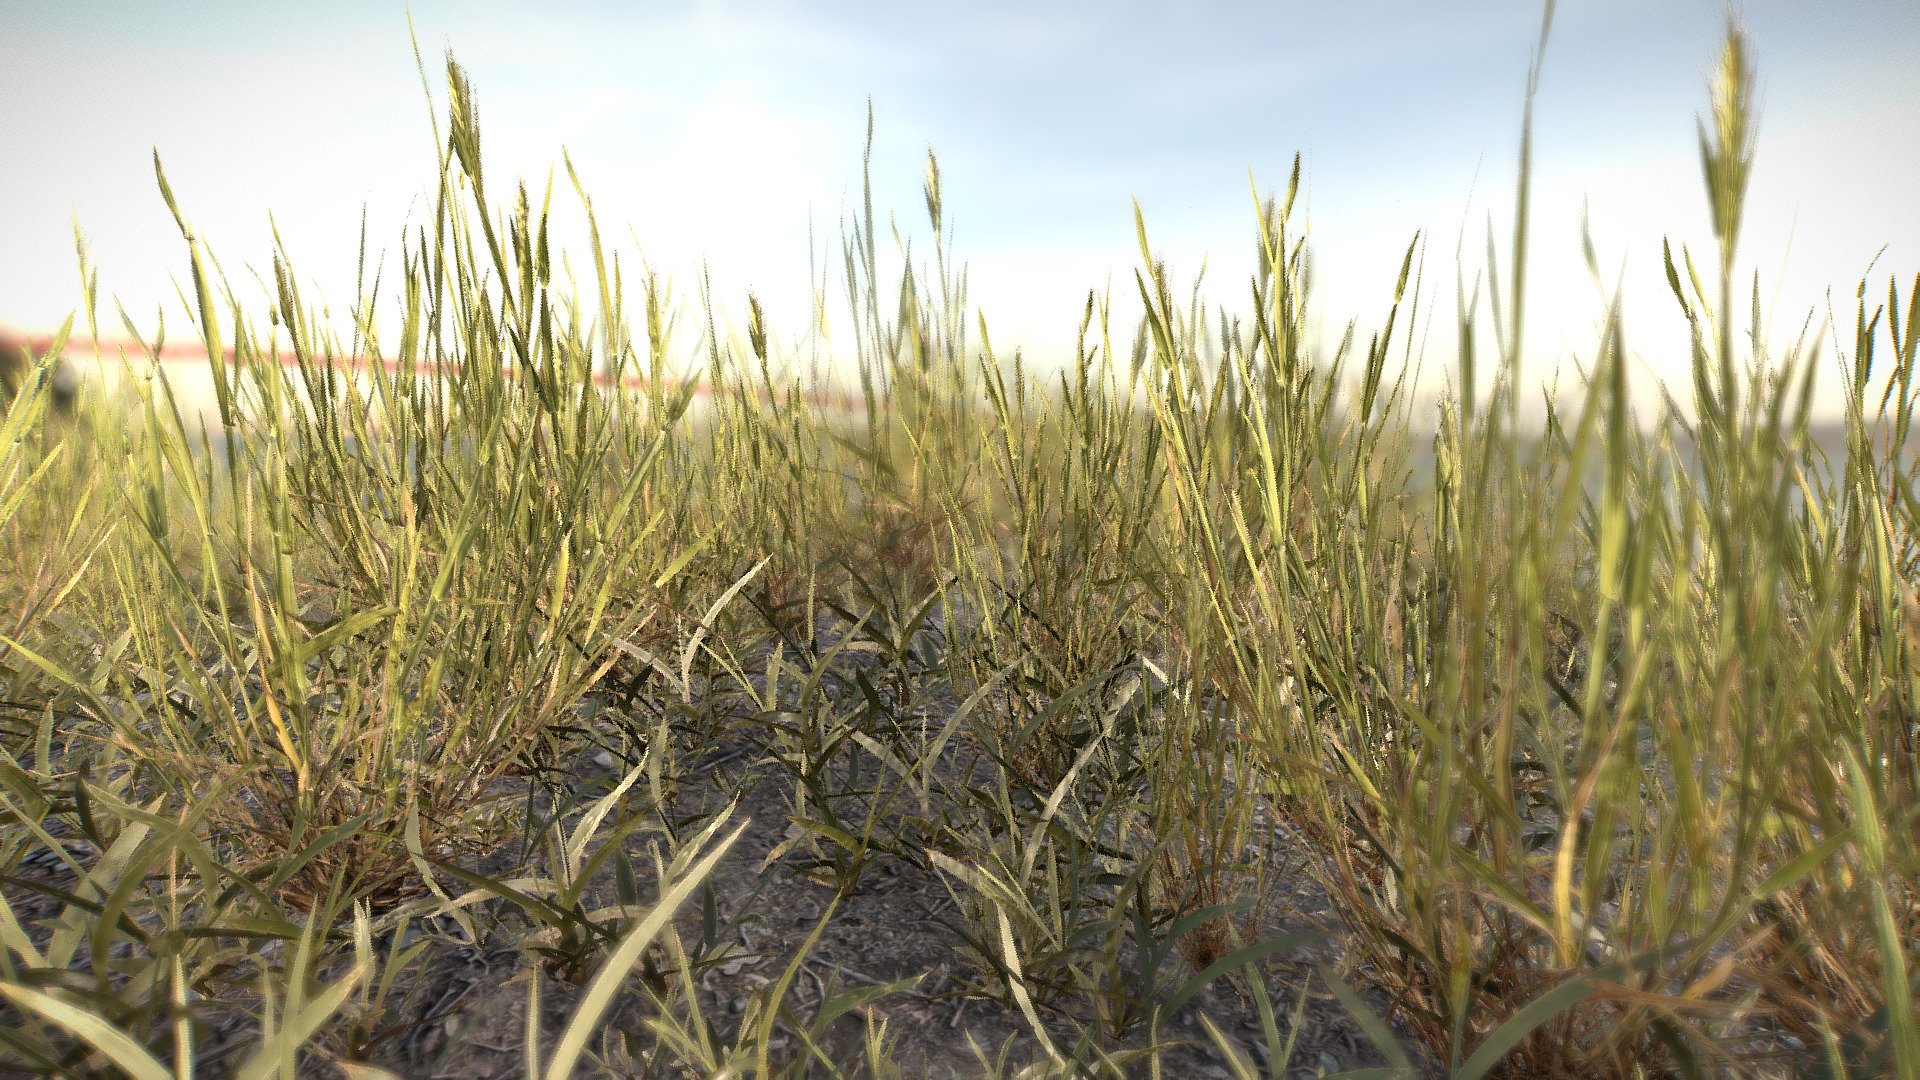 A good reference or gameobject to a computer game, renders, ect&hellip;

4k difuse map, normal map, concavity map, ambient occlusion map&hellip;

4 low poly models of grass chunks + terrain tile texture

enjoy :)

Much more on the Artstation page: https://danielskl.artstation.com/projects/q1aWe - Simple grass chunks - Download Free 3D model by 3dhdscan 3d model